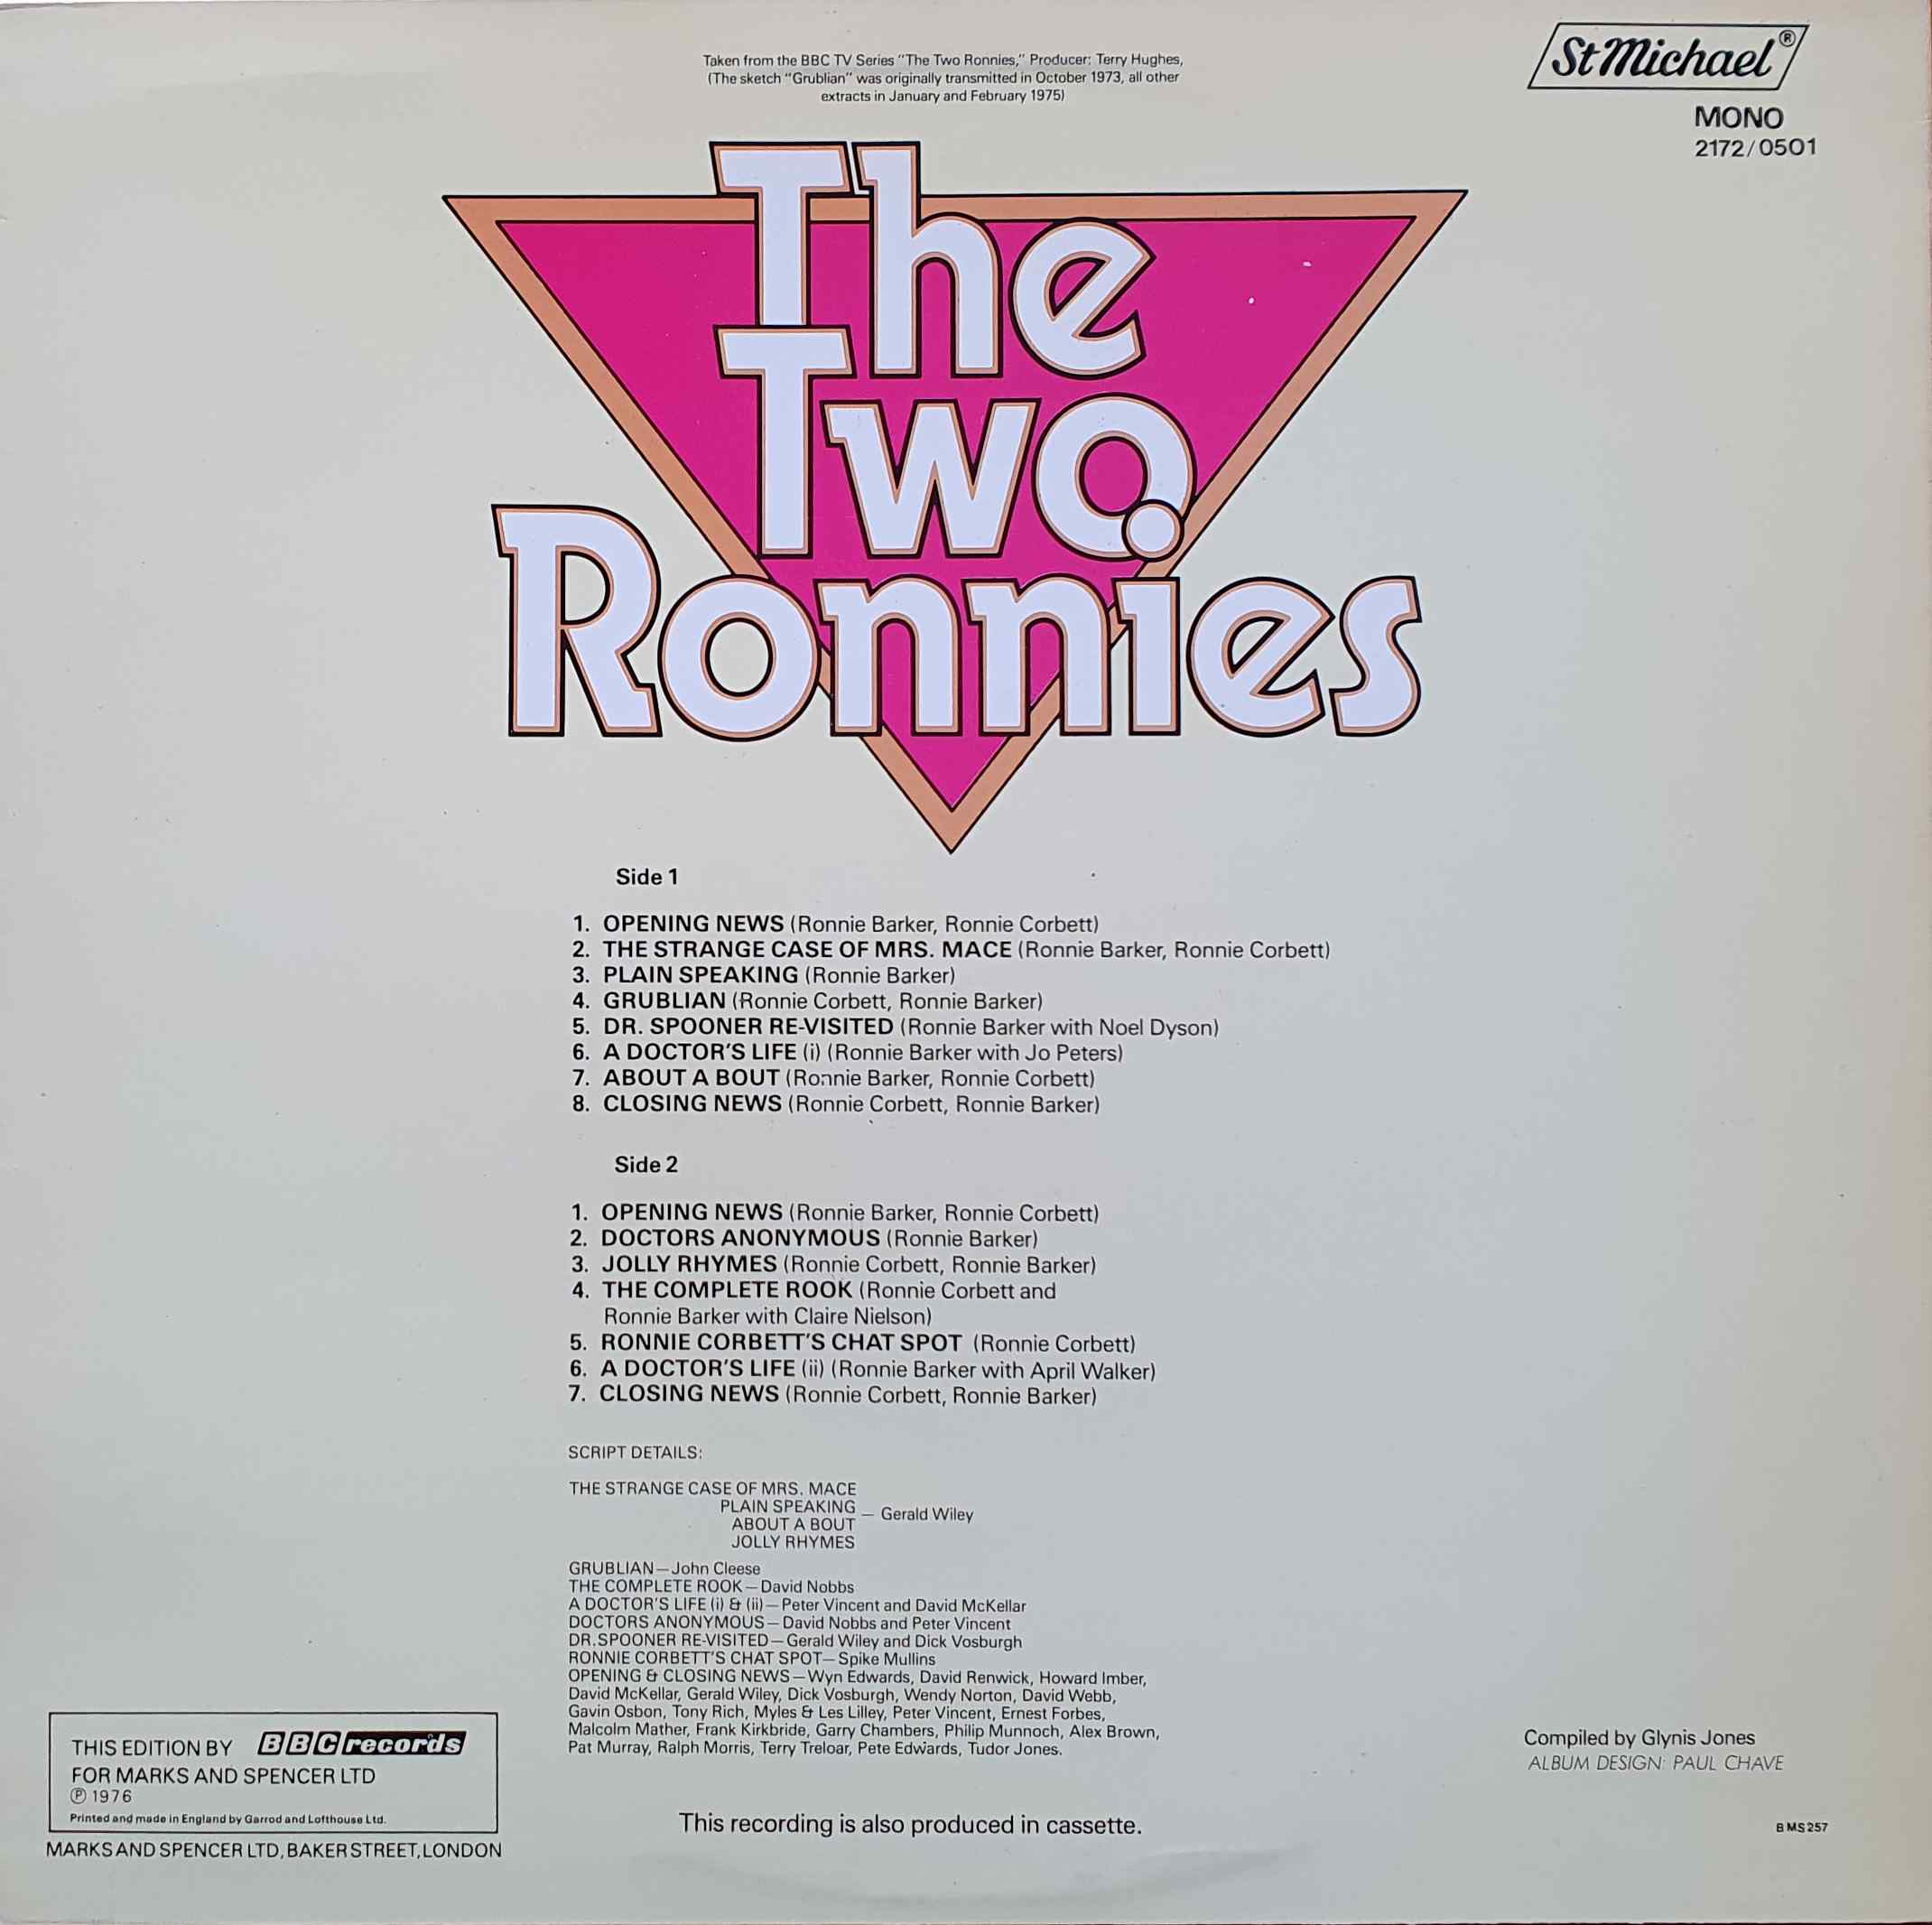 Picture of 2172 0501 The two Ronnies by artist Ronnie Barker / Ronnie Corbett from the BBC records and Tapes library